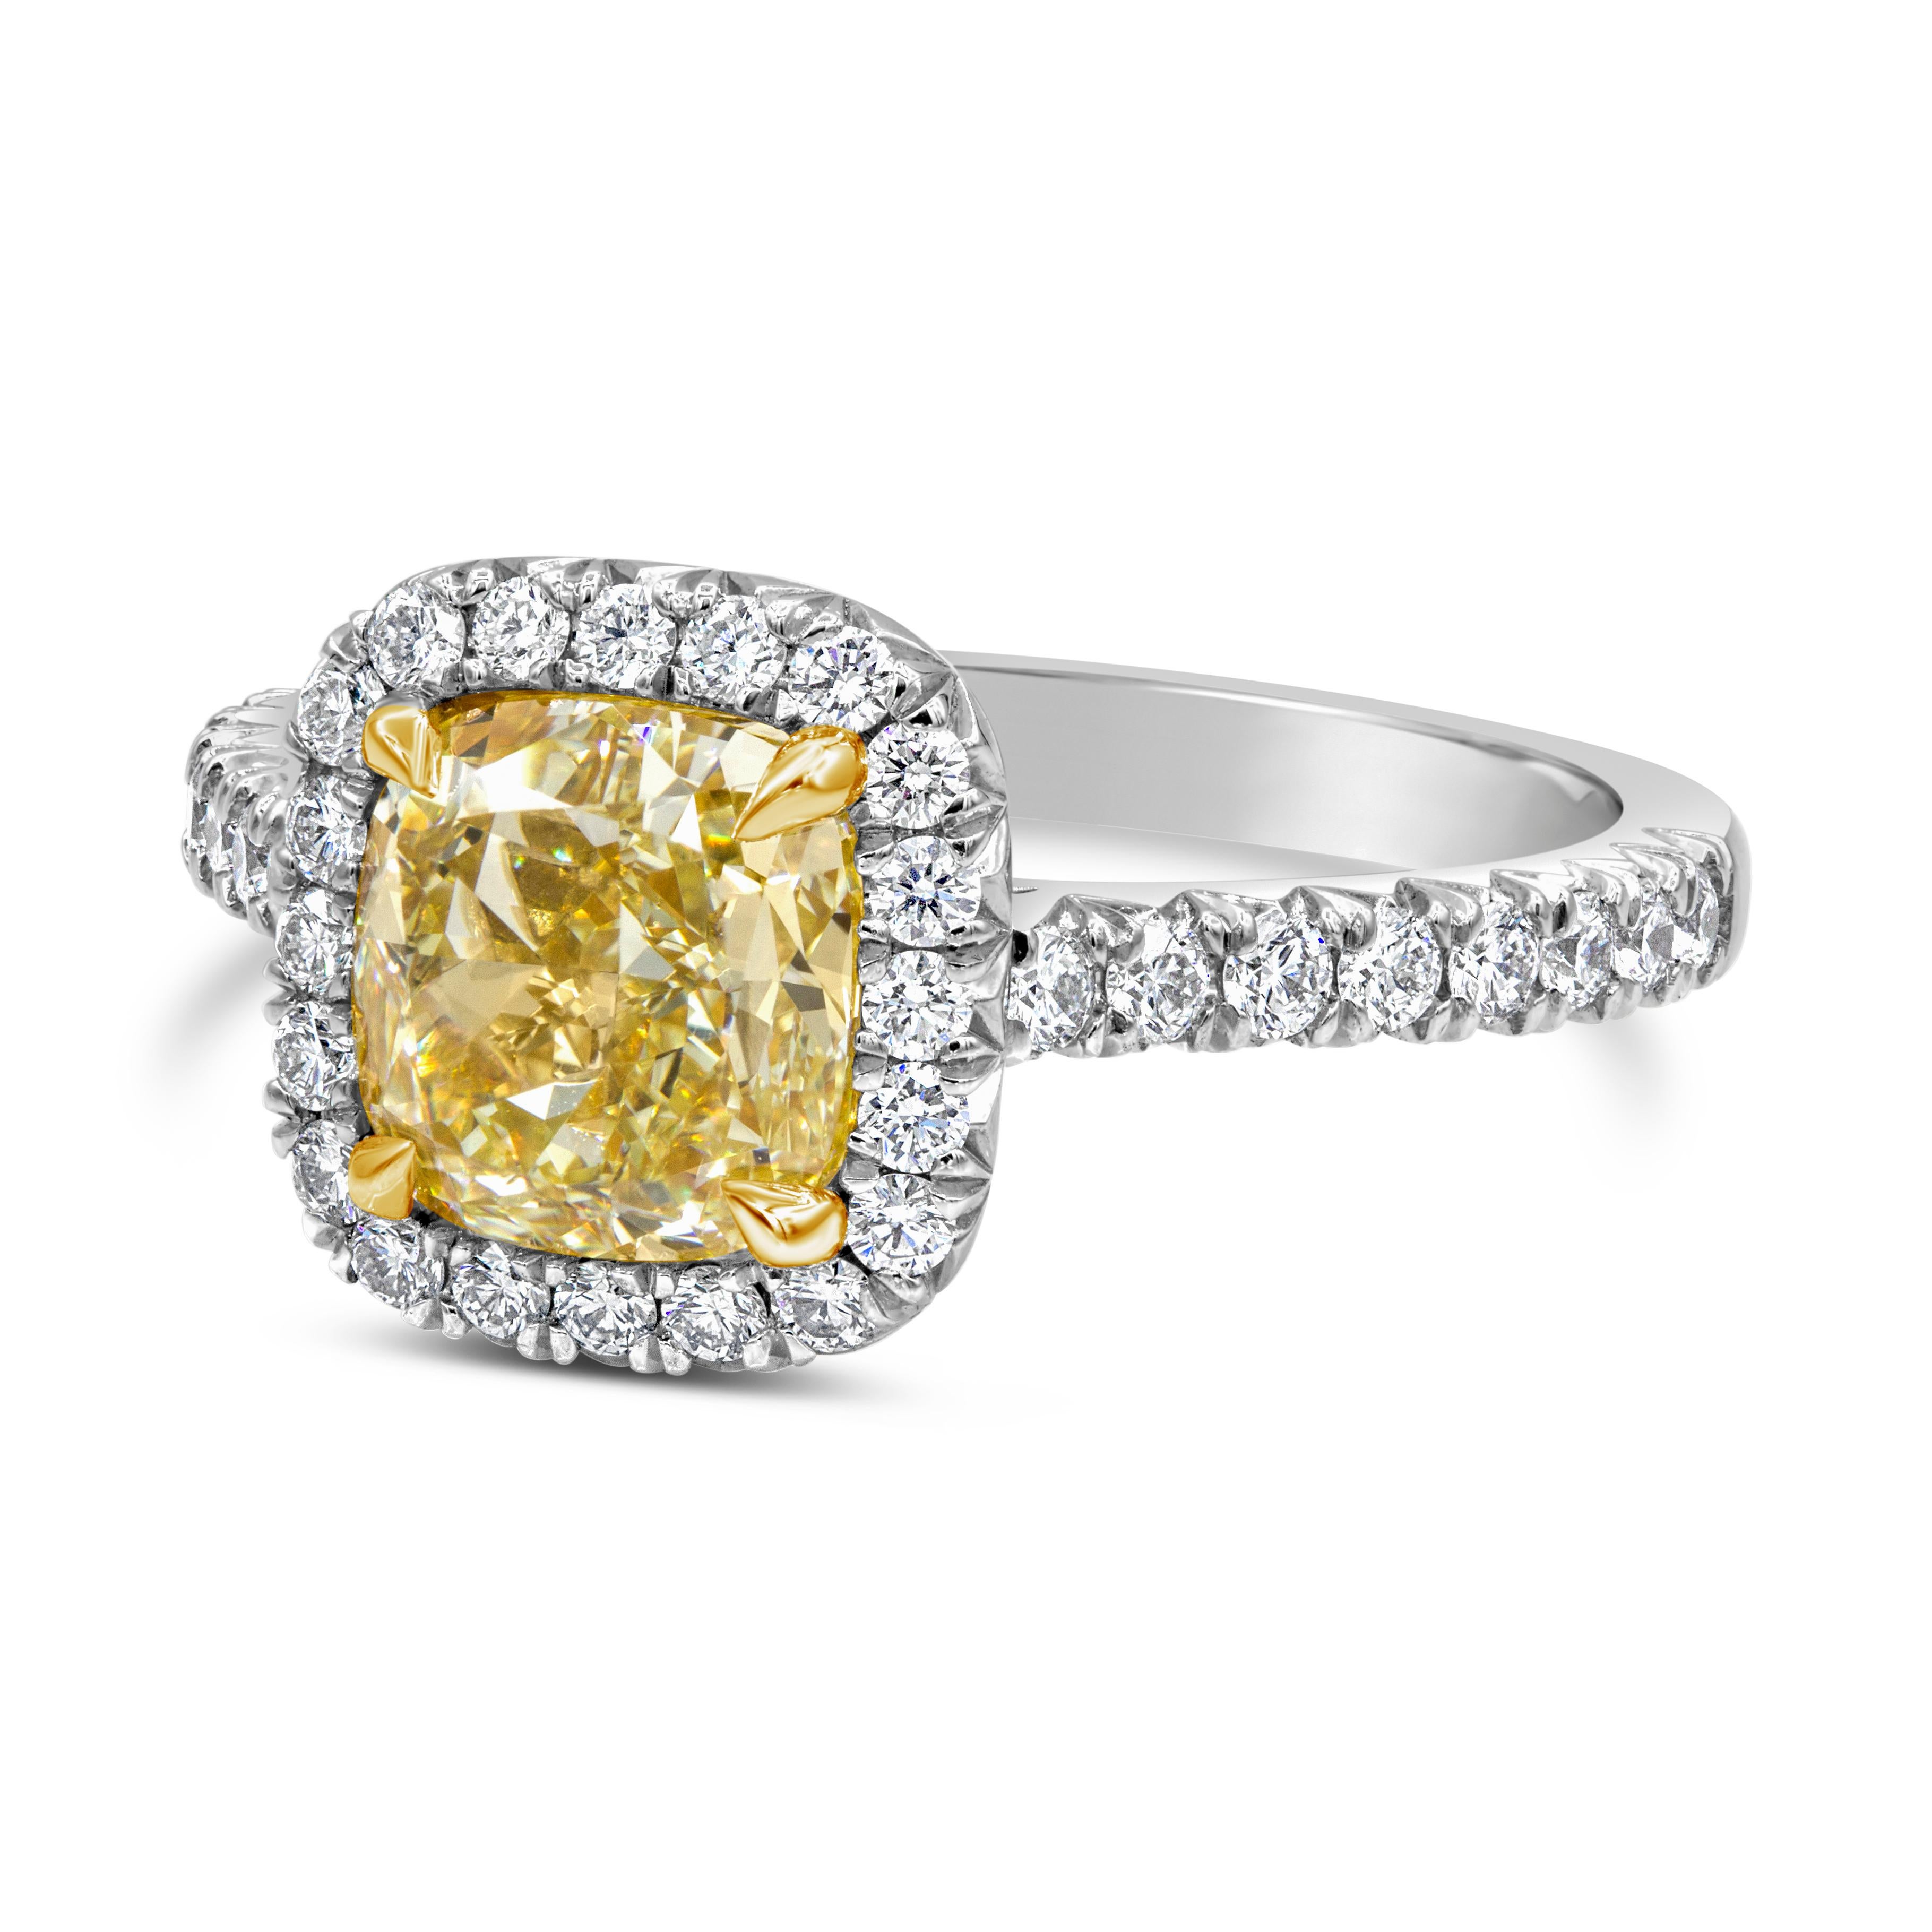 This halo engagement ring features a 2.01 carats cushion cut diamond engagement ring that GIA certified as Fancy Light Yellow in color and VVS1 clarity, set in four prong setting made in 18K yellow gold. Brilliant round diamonds surround the yellow